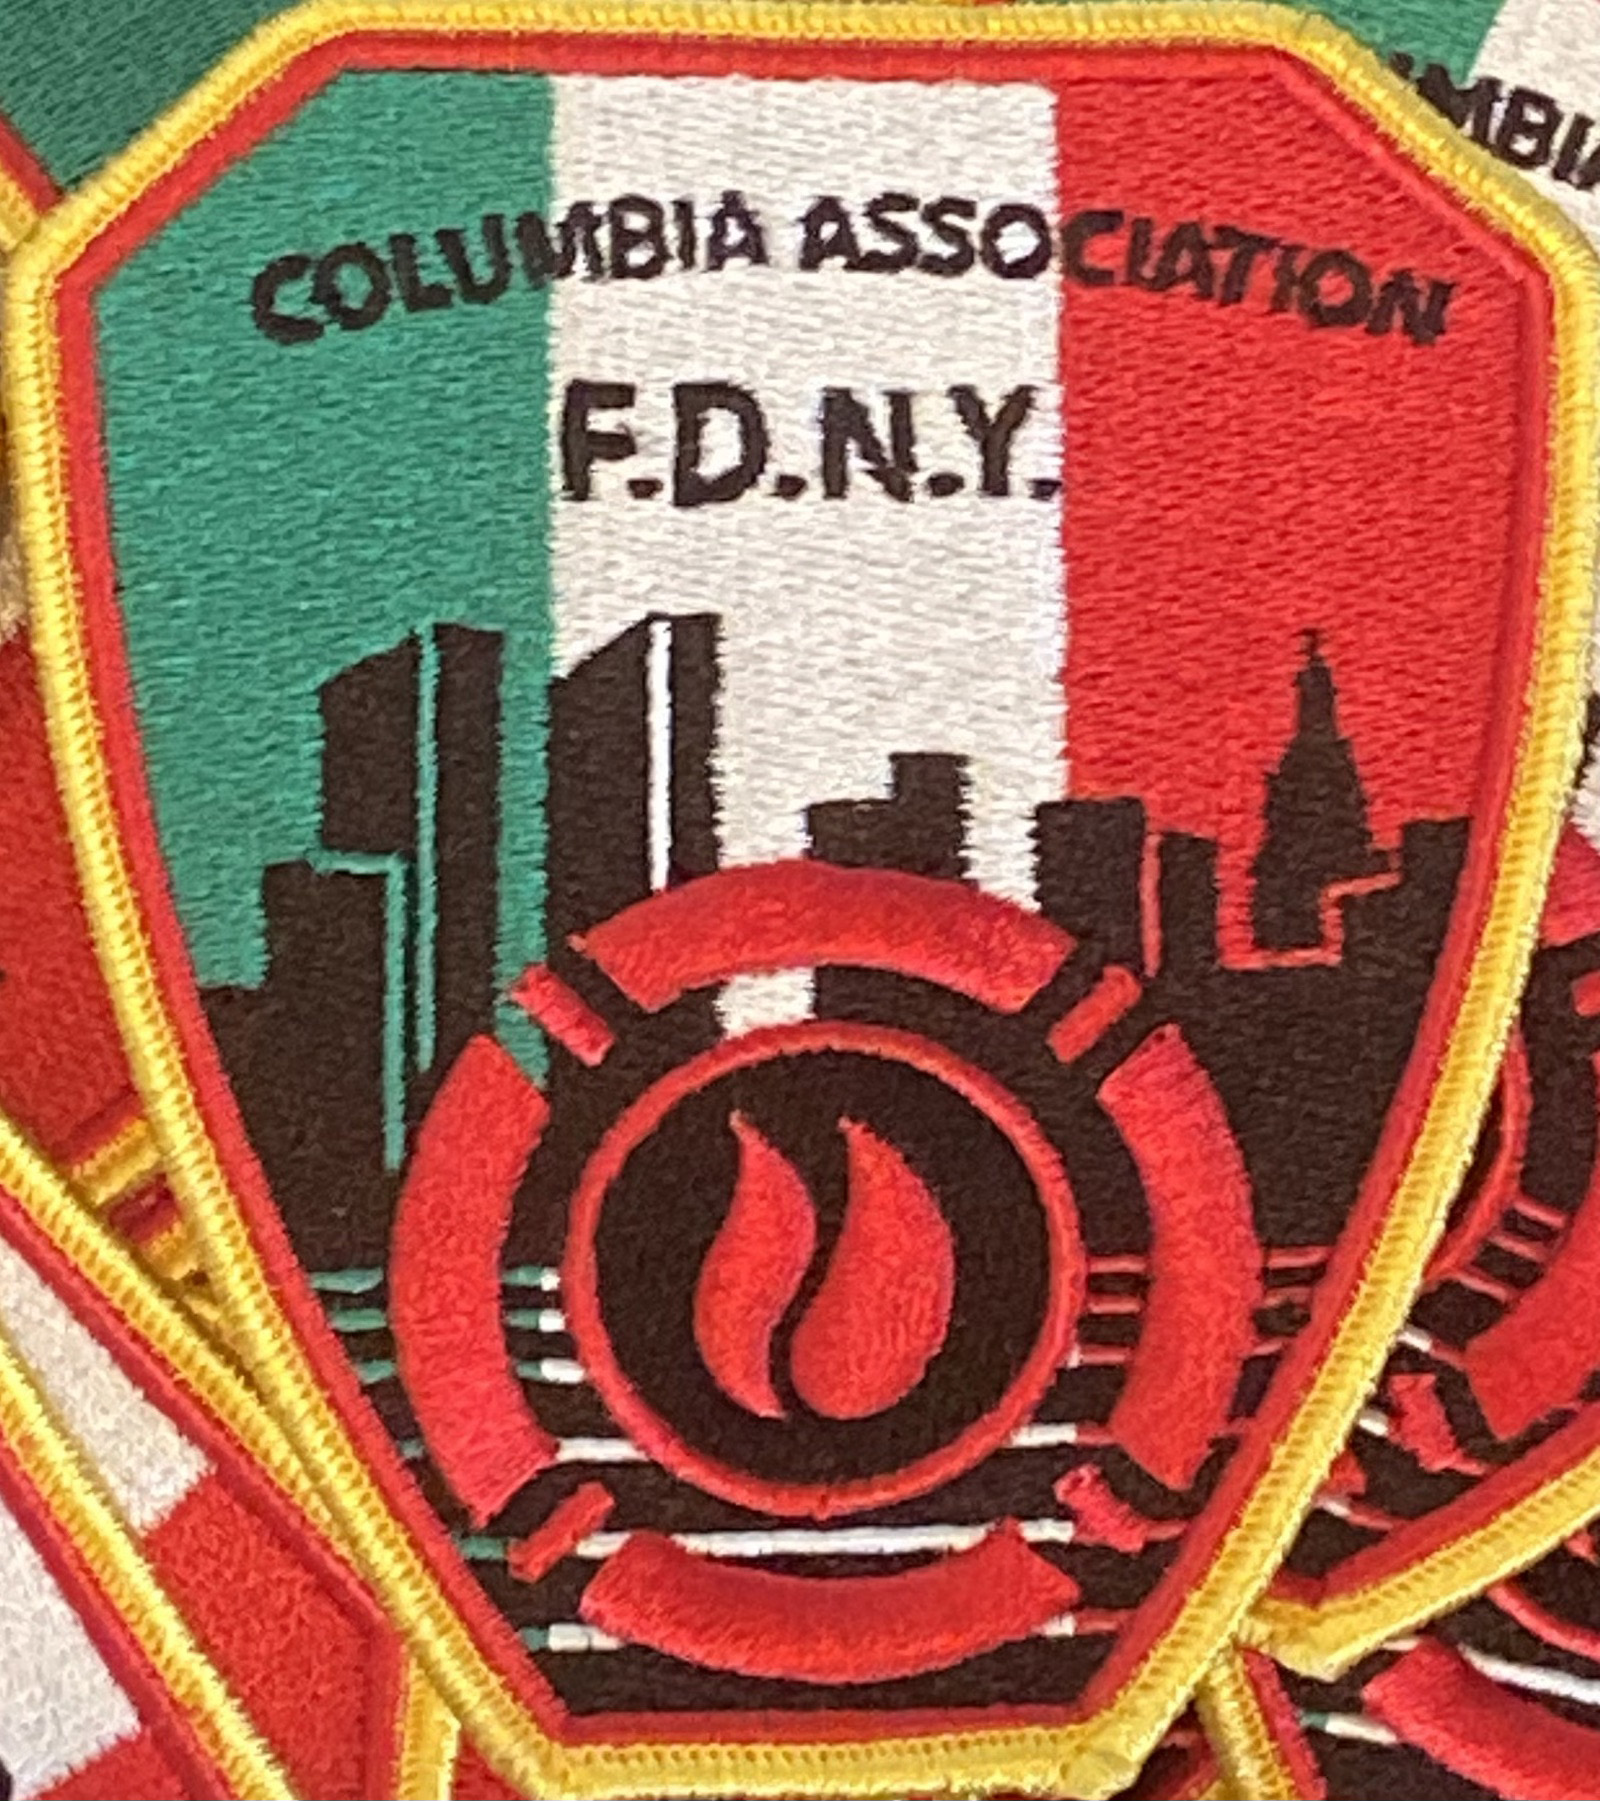 FDNY Columbia Association Patch